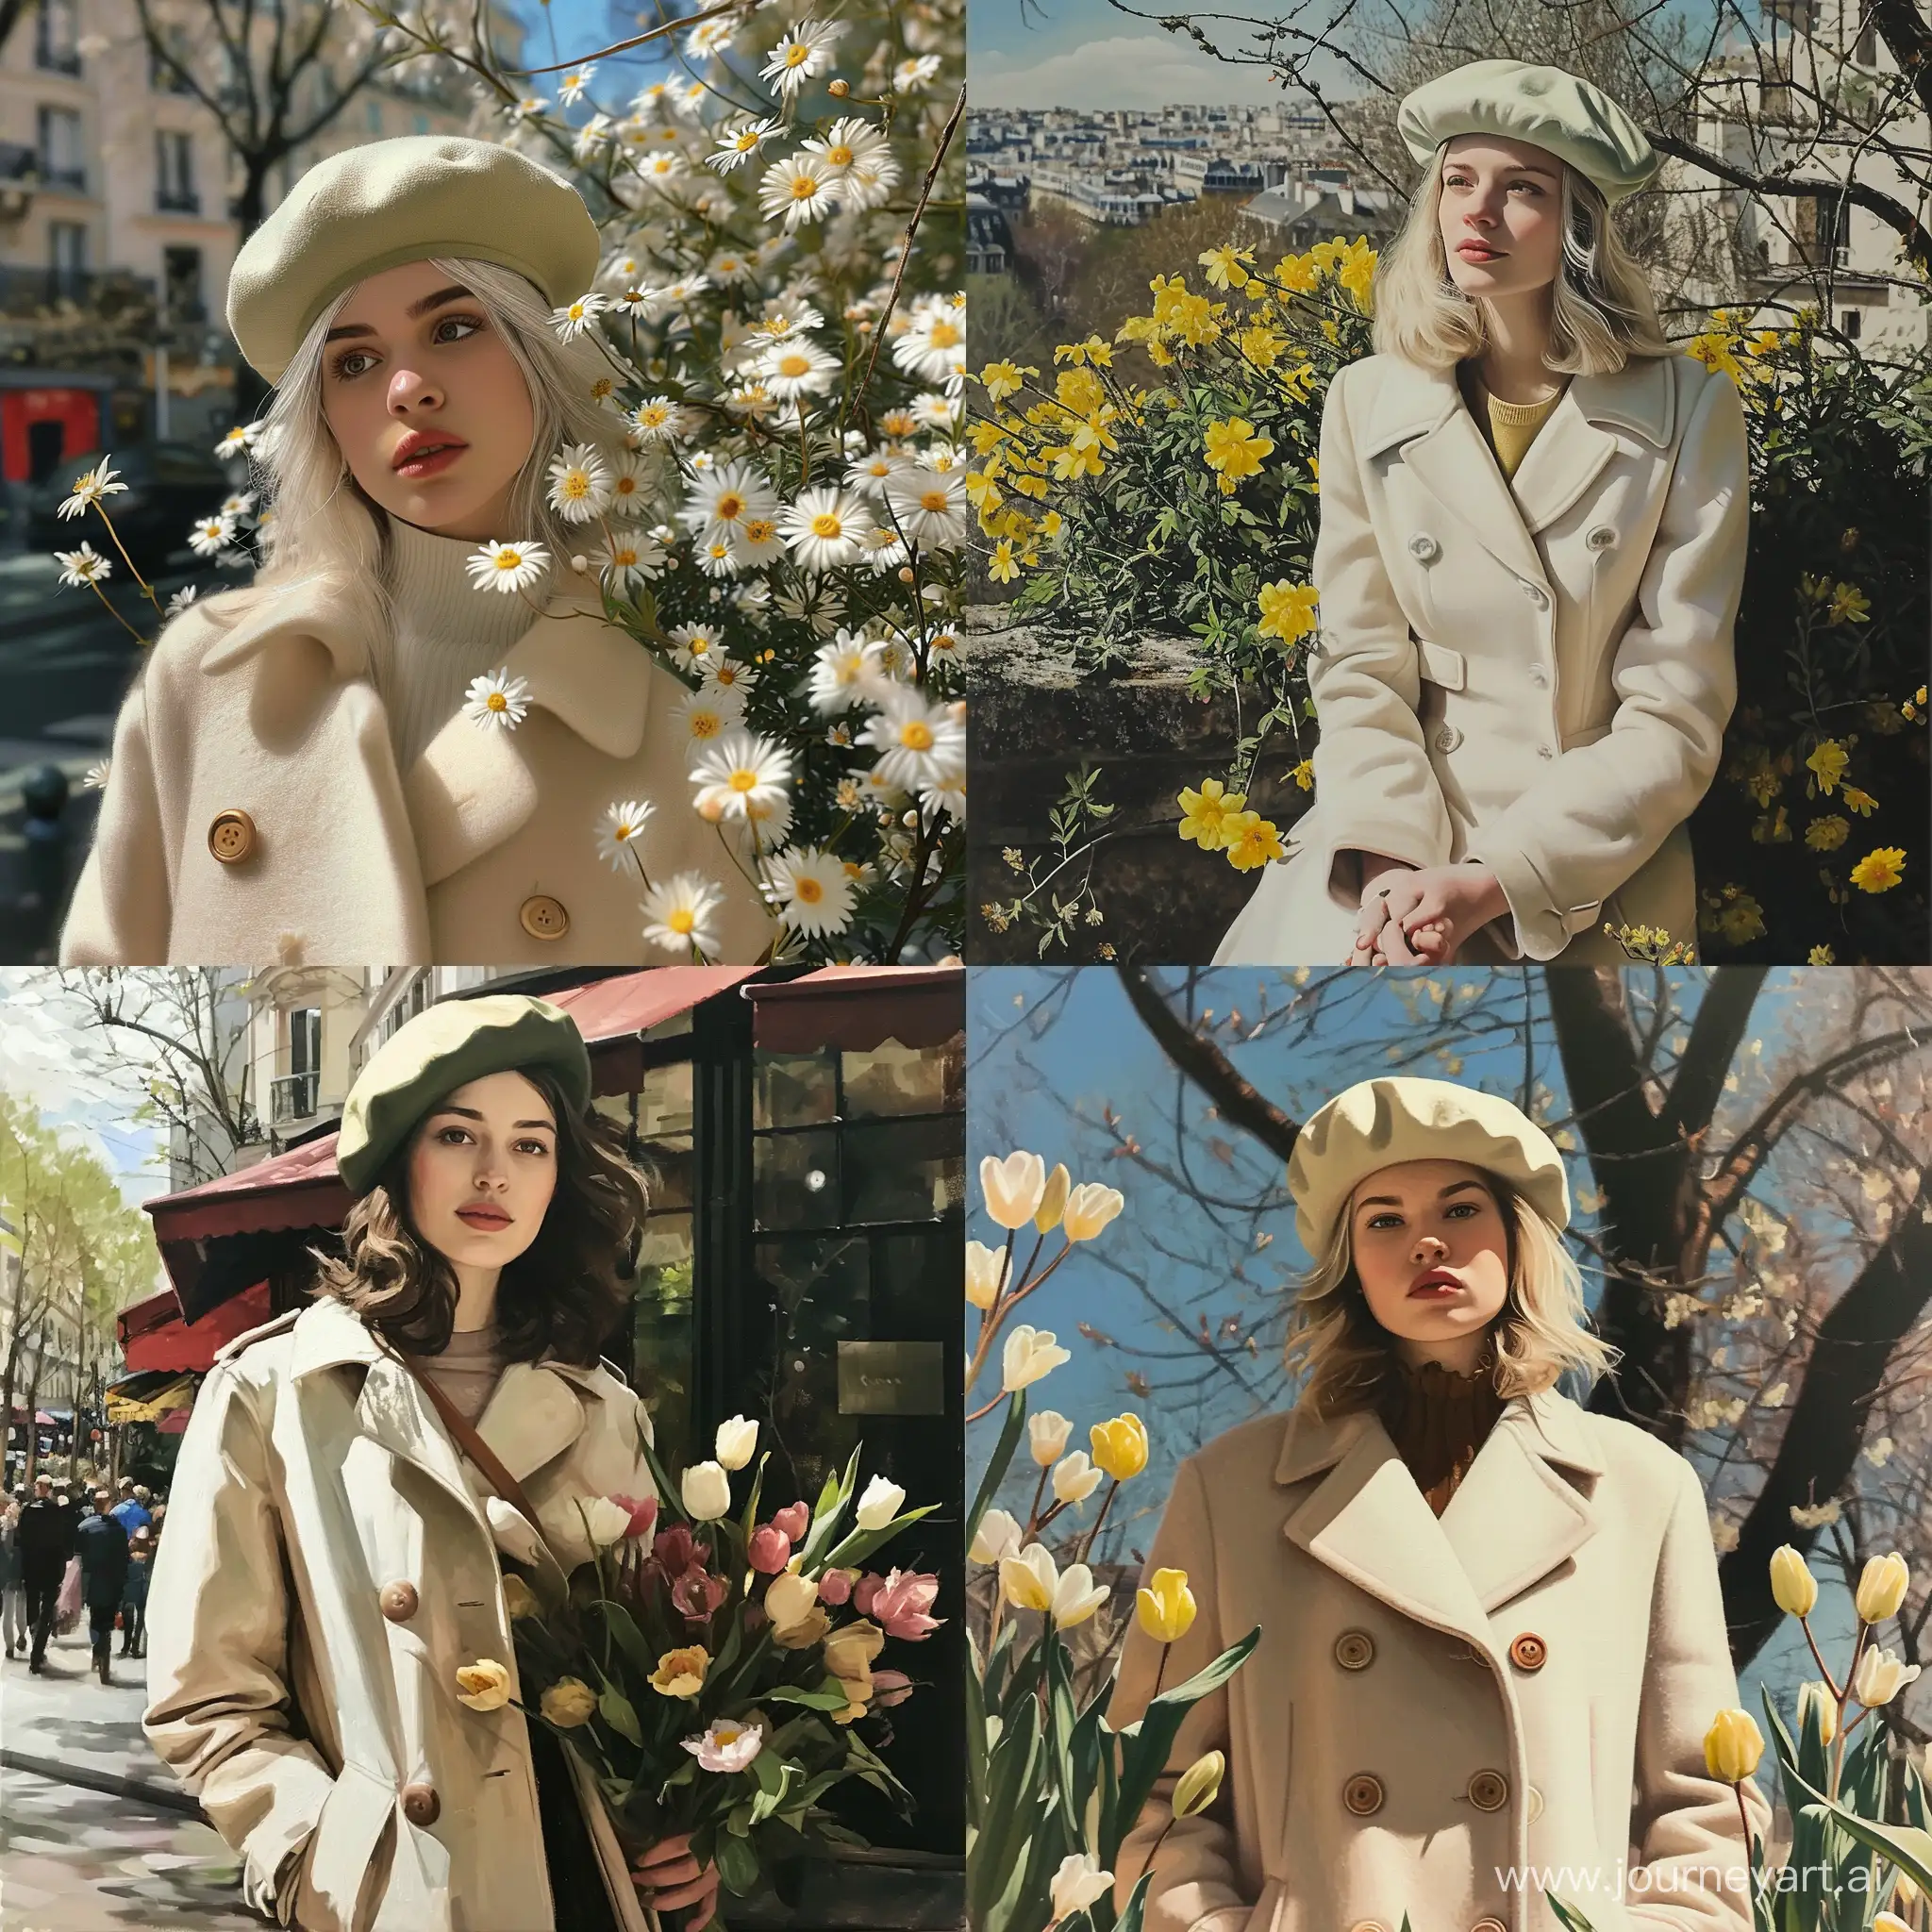 white woman, French woman, beret coat, flowers, Paris, spring, sunny day, Montmartre, full body, realism. v 6